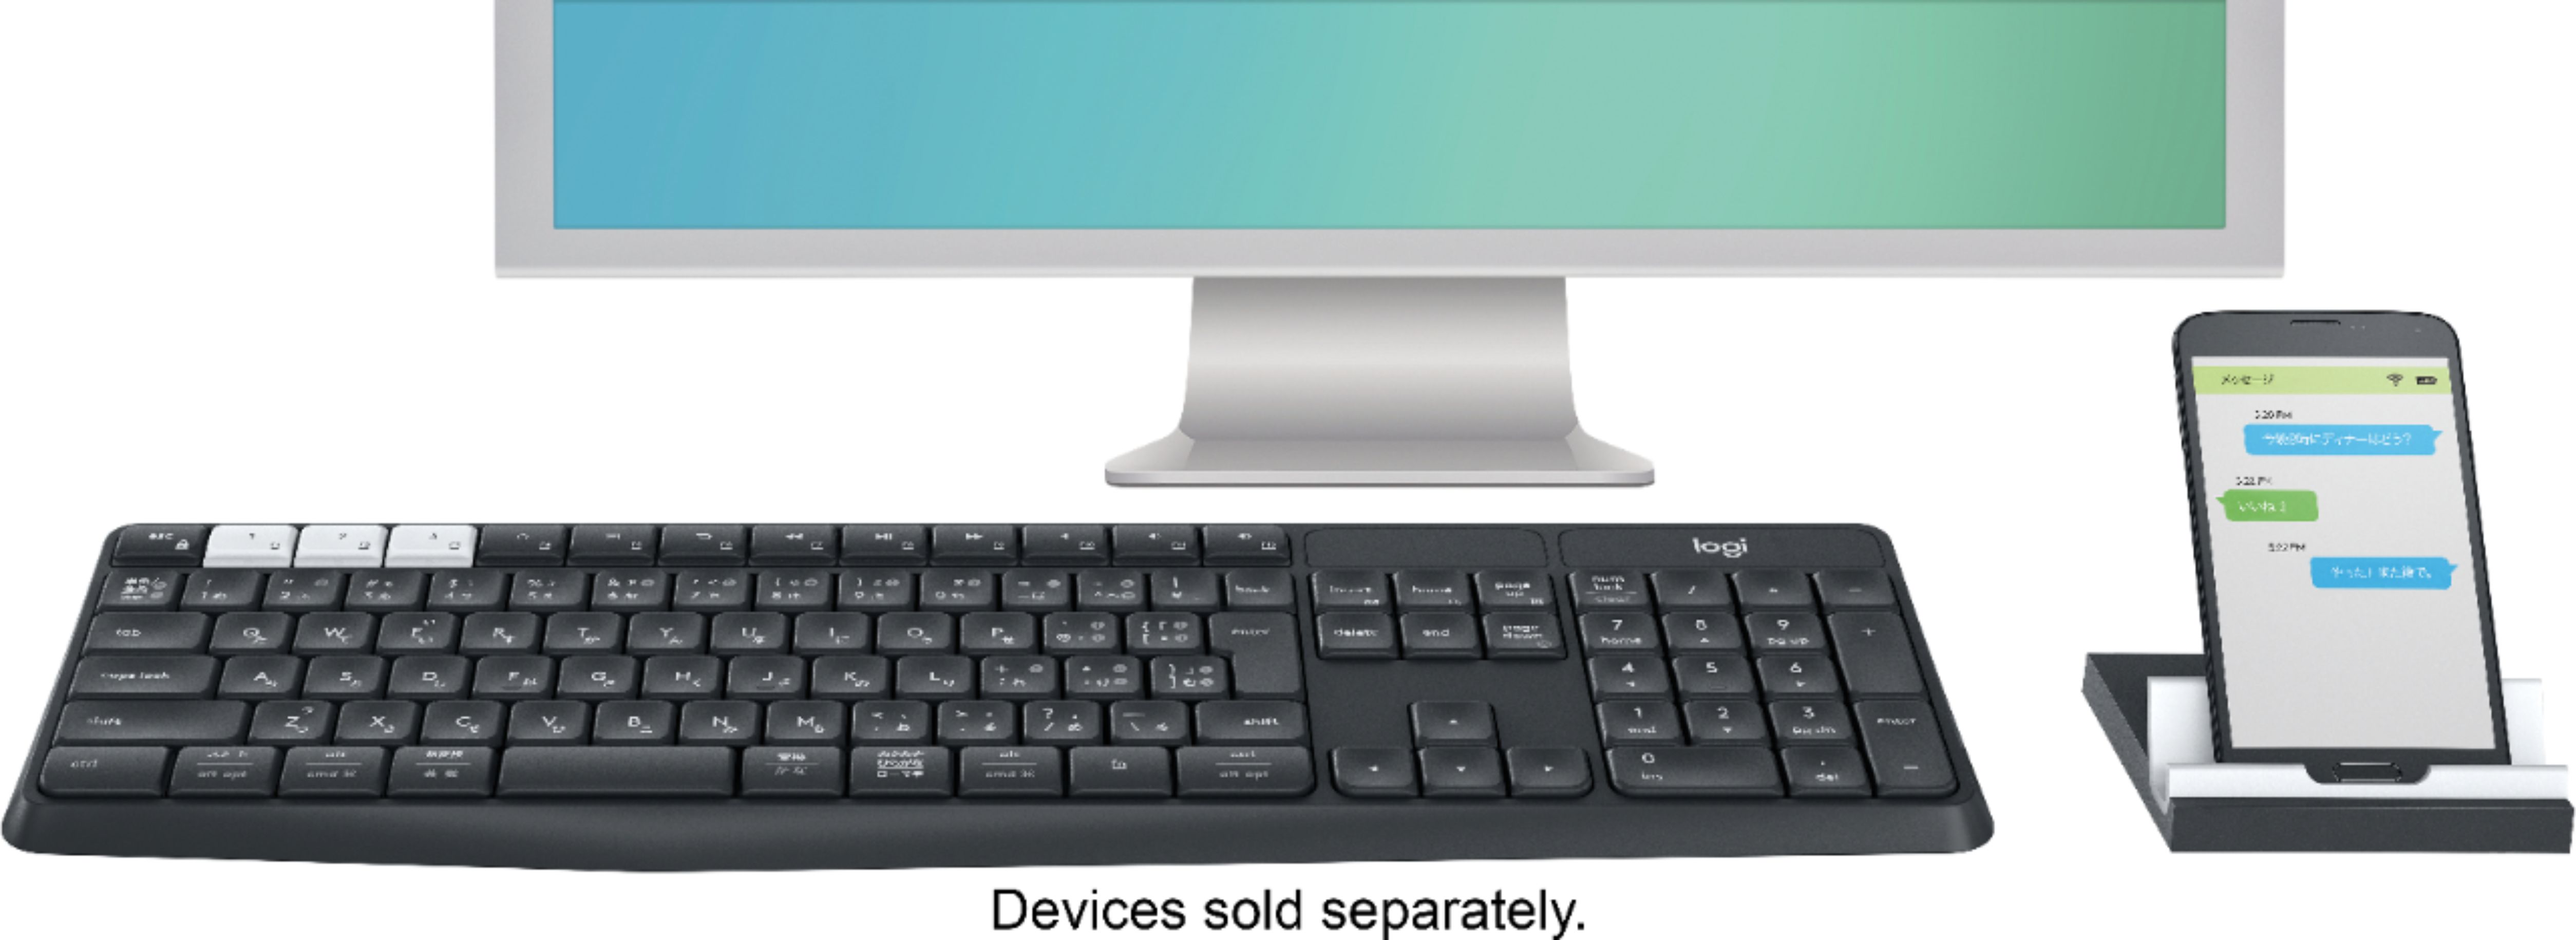 Buy: Logitech K375s Multi-Device Wireless Keyboard with Mobile Stand Graphite/Off-White